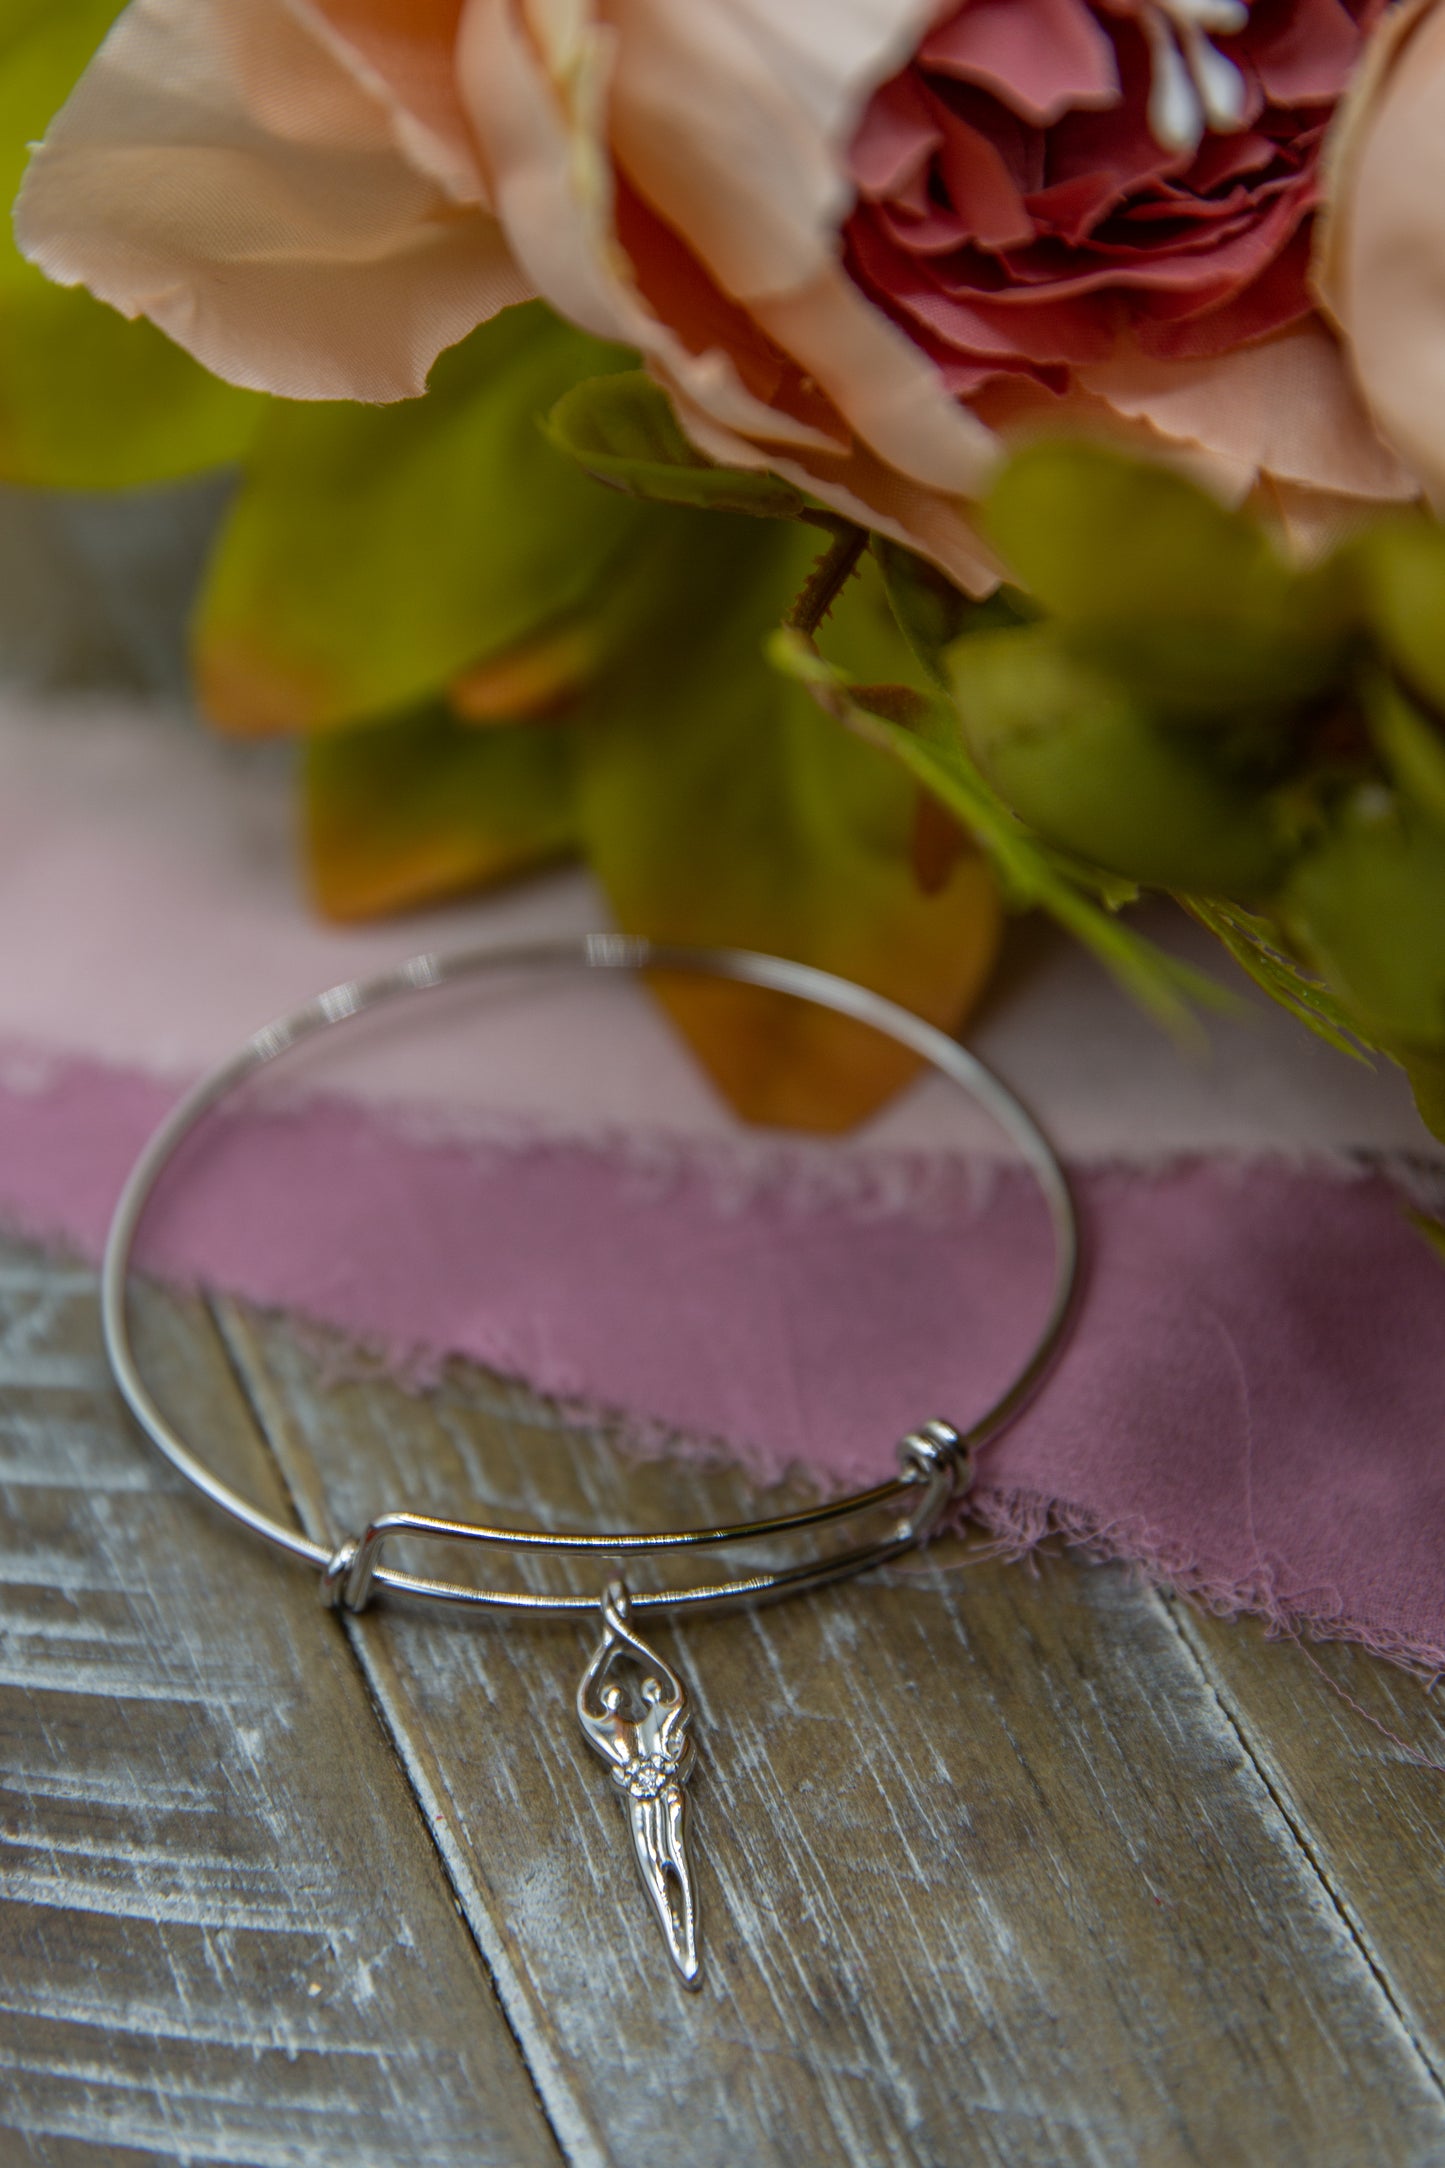 Double Adjustable, Medium 7" - 8.5" Sized Bangle, .925 Sterling Silver, 1" by ¼" Small Charm, Clear Cubic Zirconia Stone